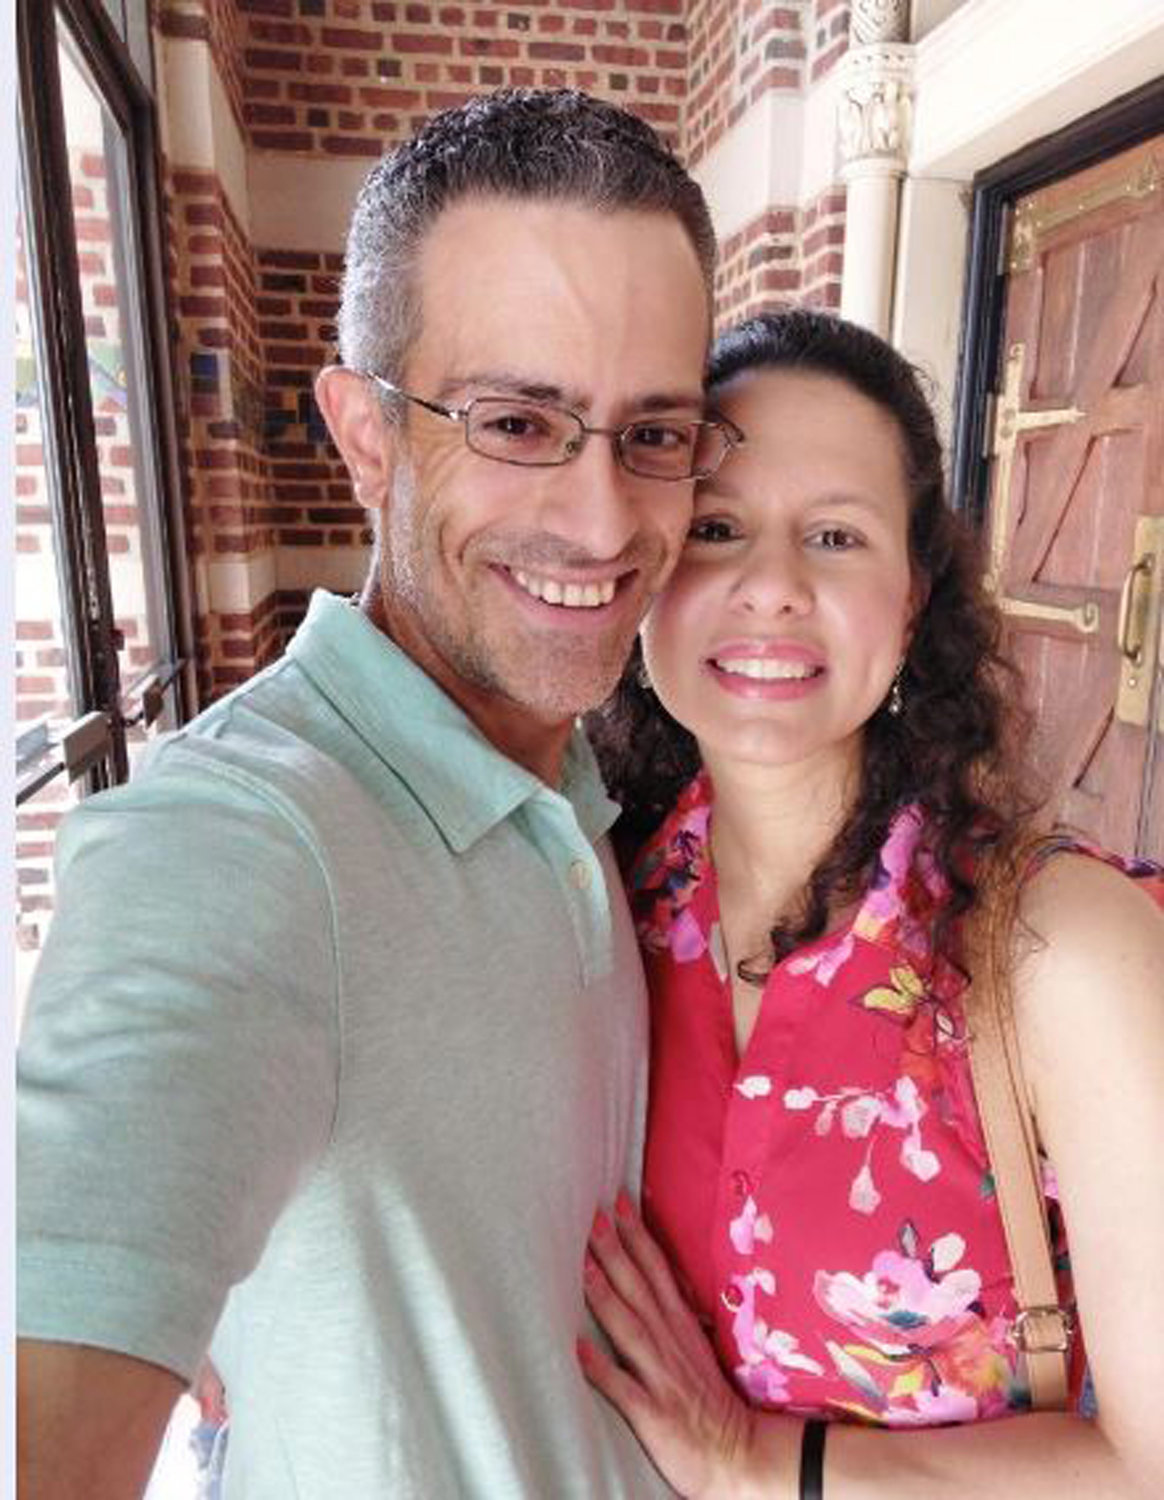 Eric Peluso, 39, a lifelong resident of West Hempstead who has suffered from kidney disease for nearly 20 years, with his wife, Michele Peluso.